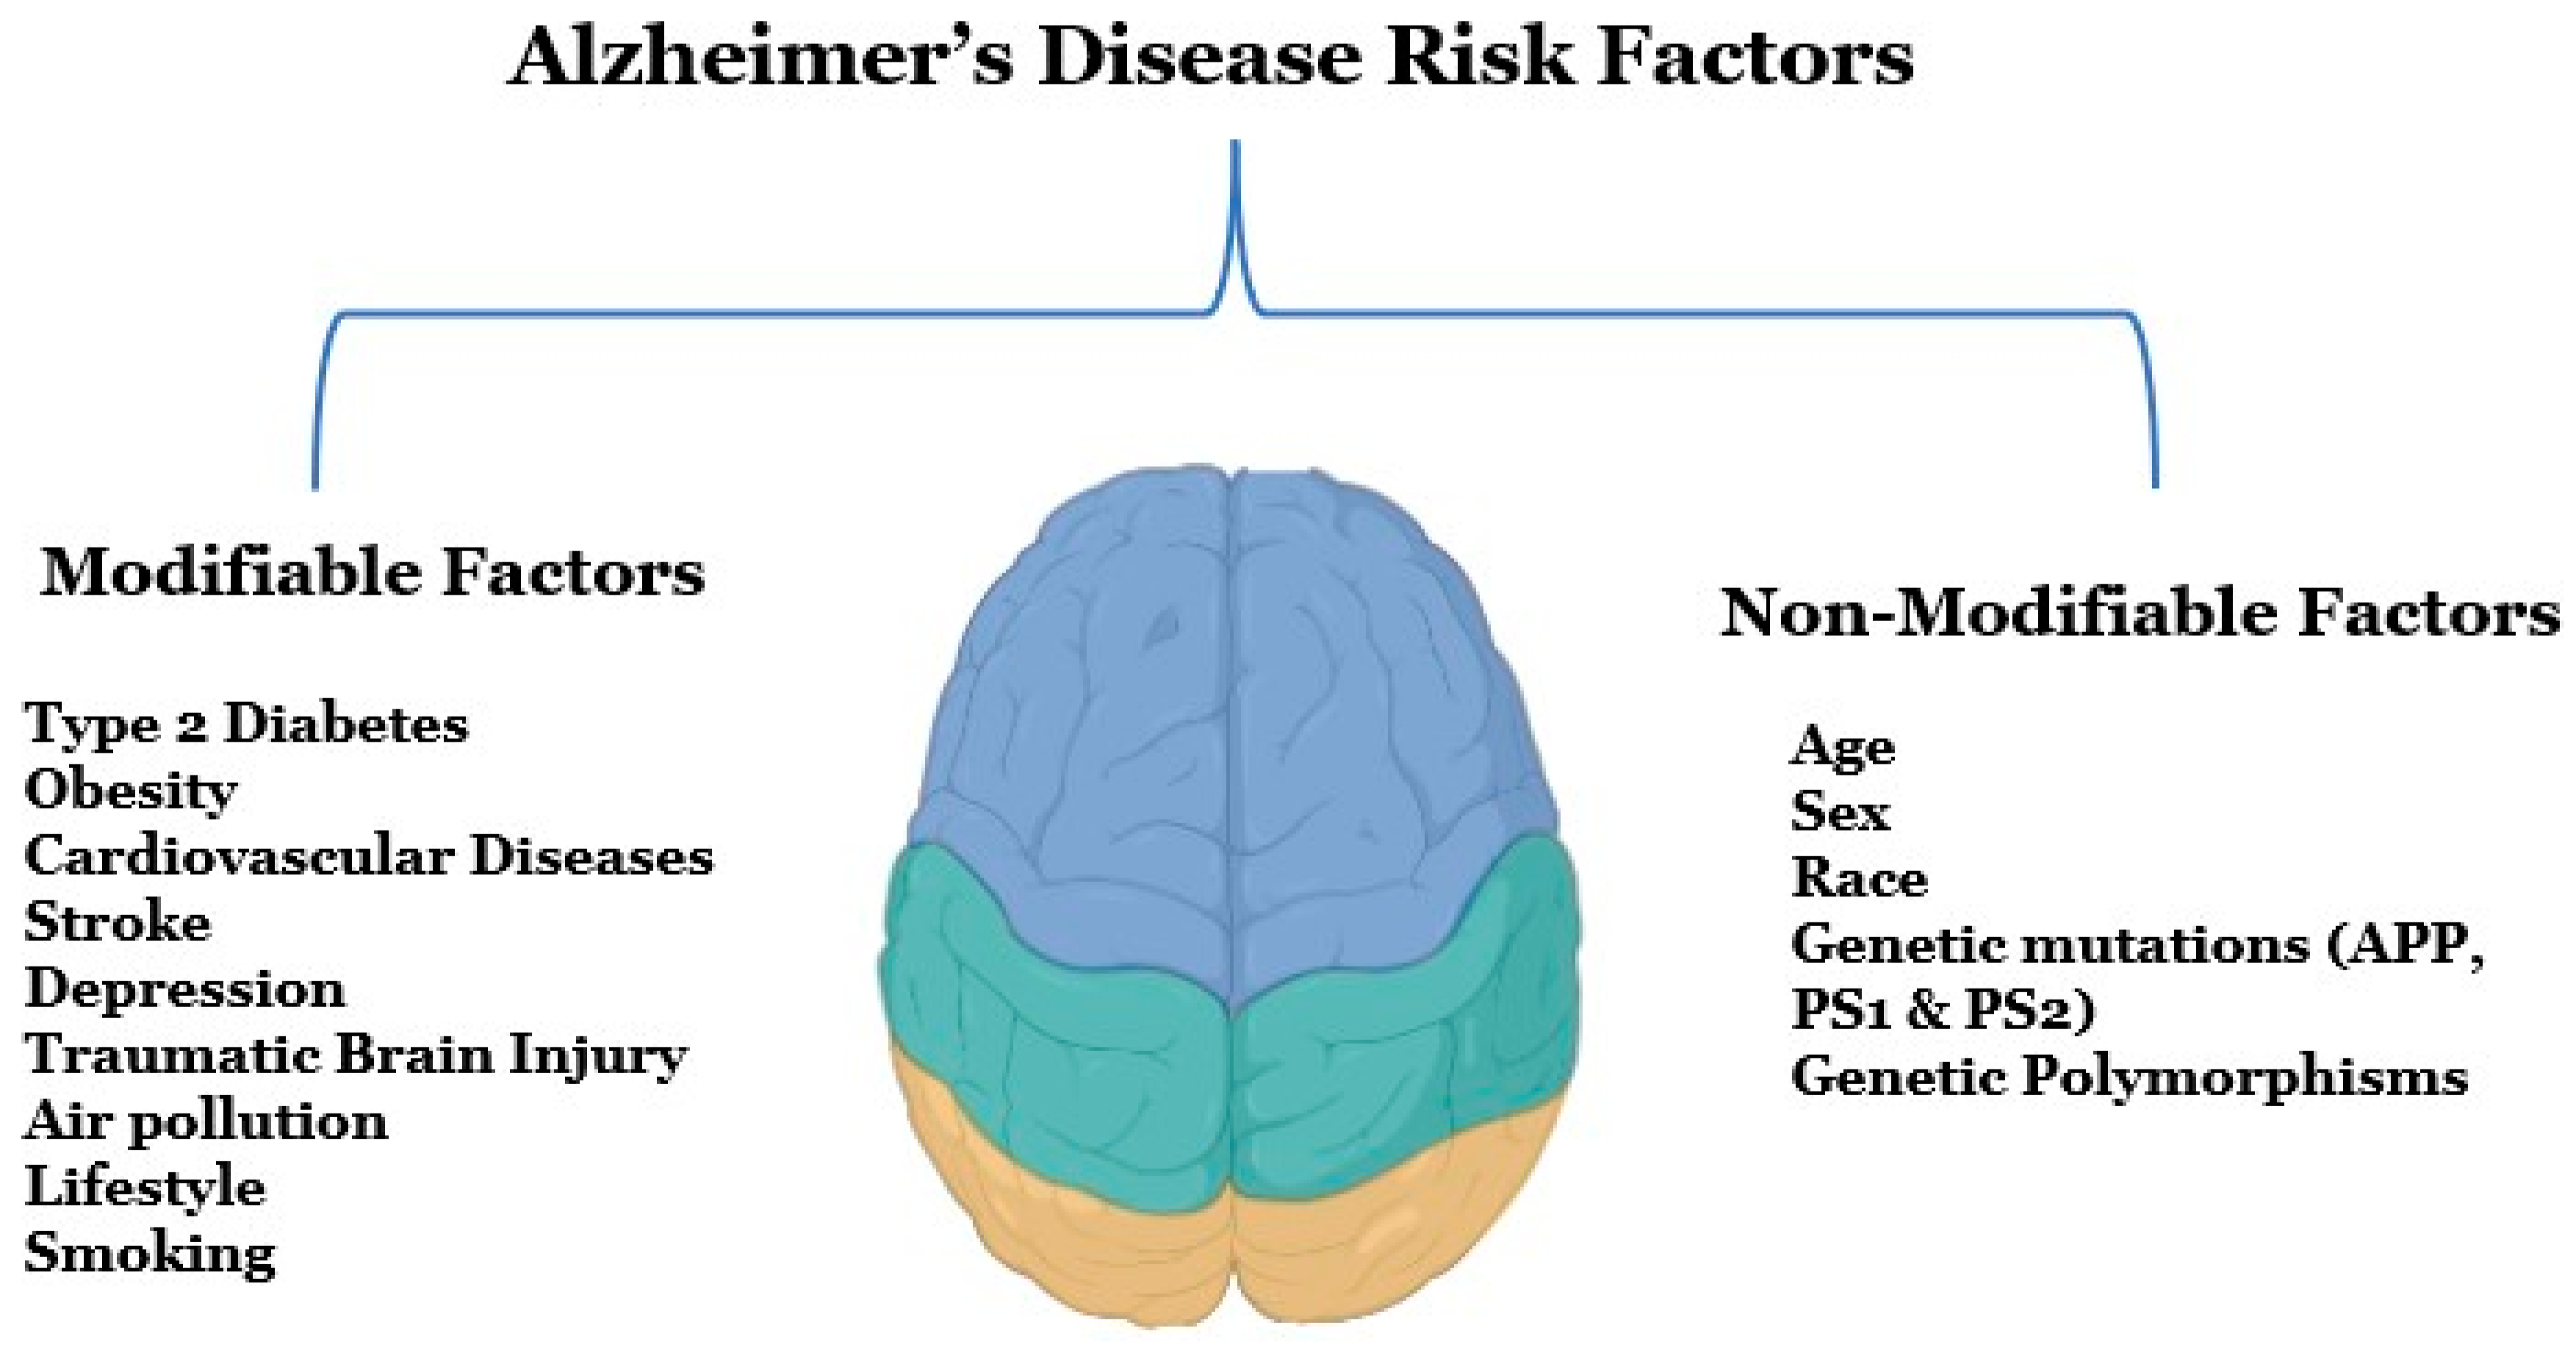 Low dopamine may indicate early Alzheimer's